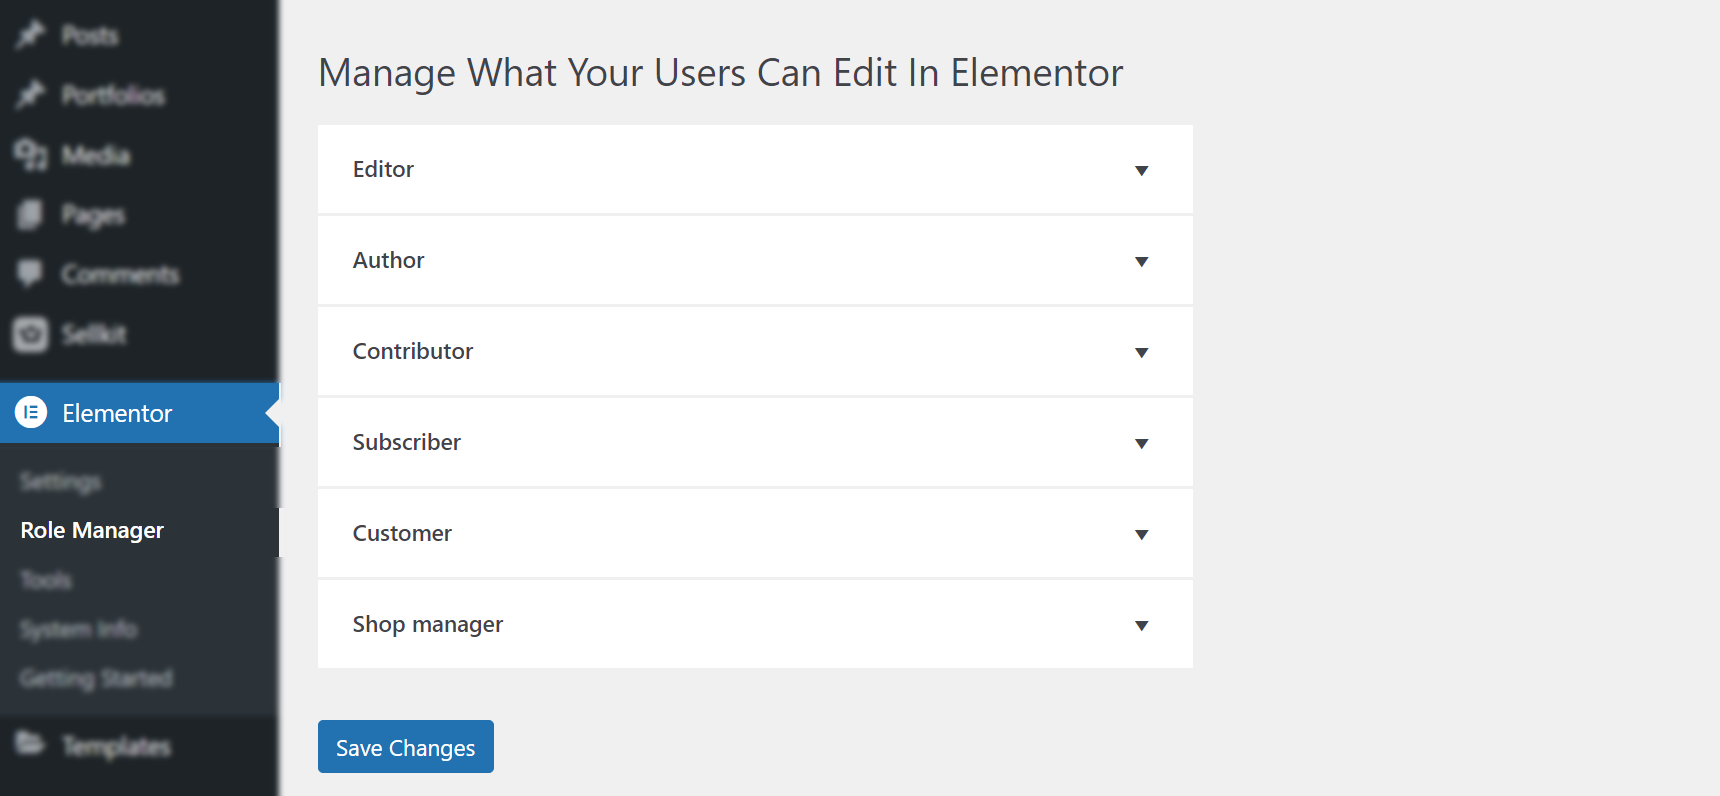 Manage what your users can edit in Elementor